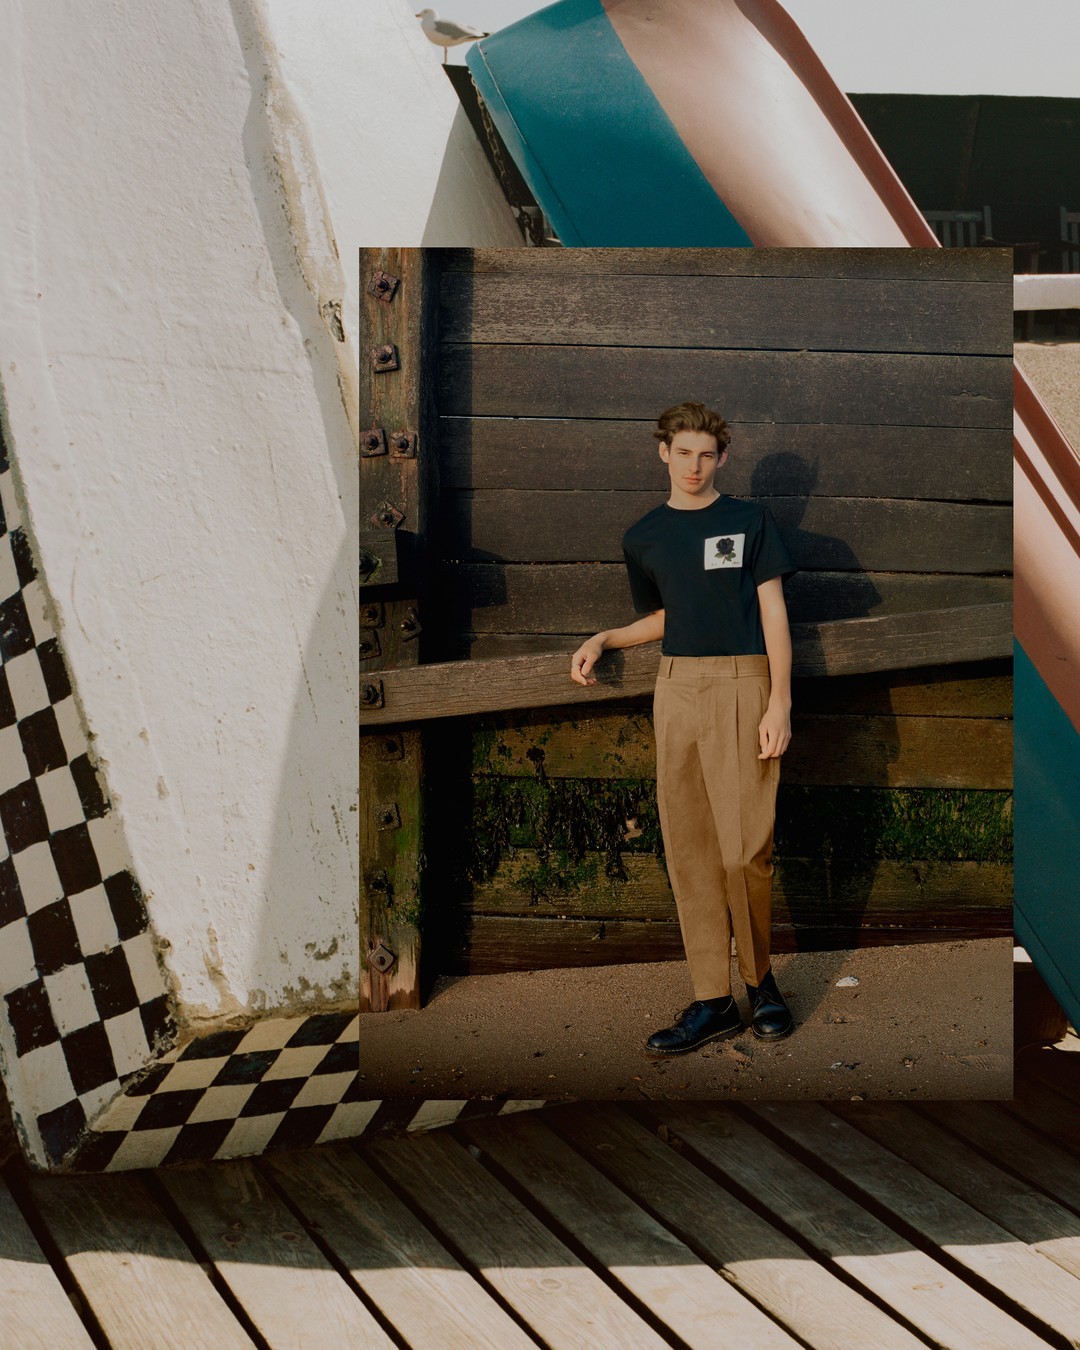 Our first SS20 Summer Edit shoot created by the photographer Oliver Marshall in isolation on the south east coast and beaches near Margate. festivalwalk ....